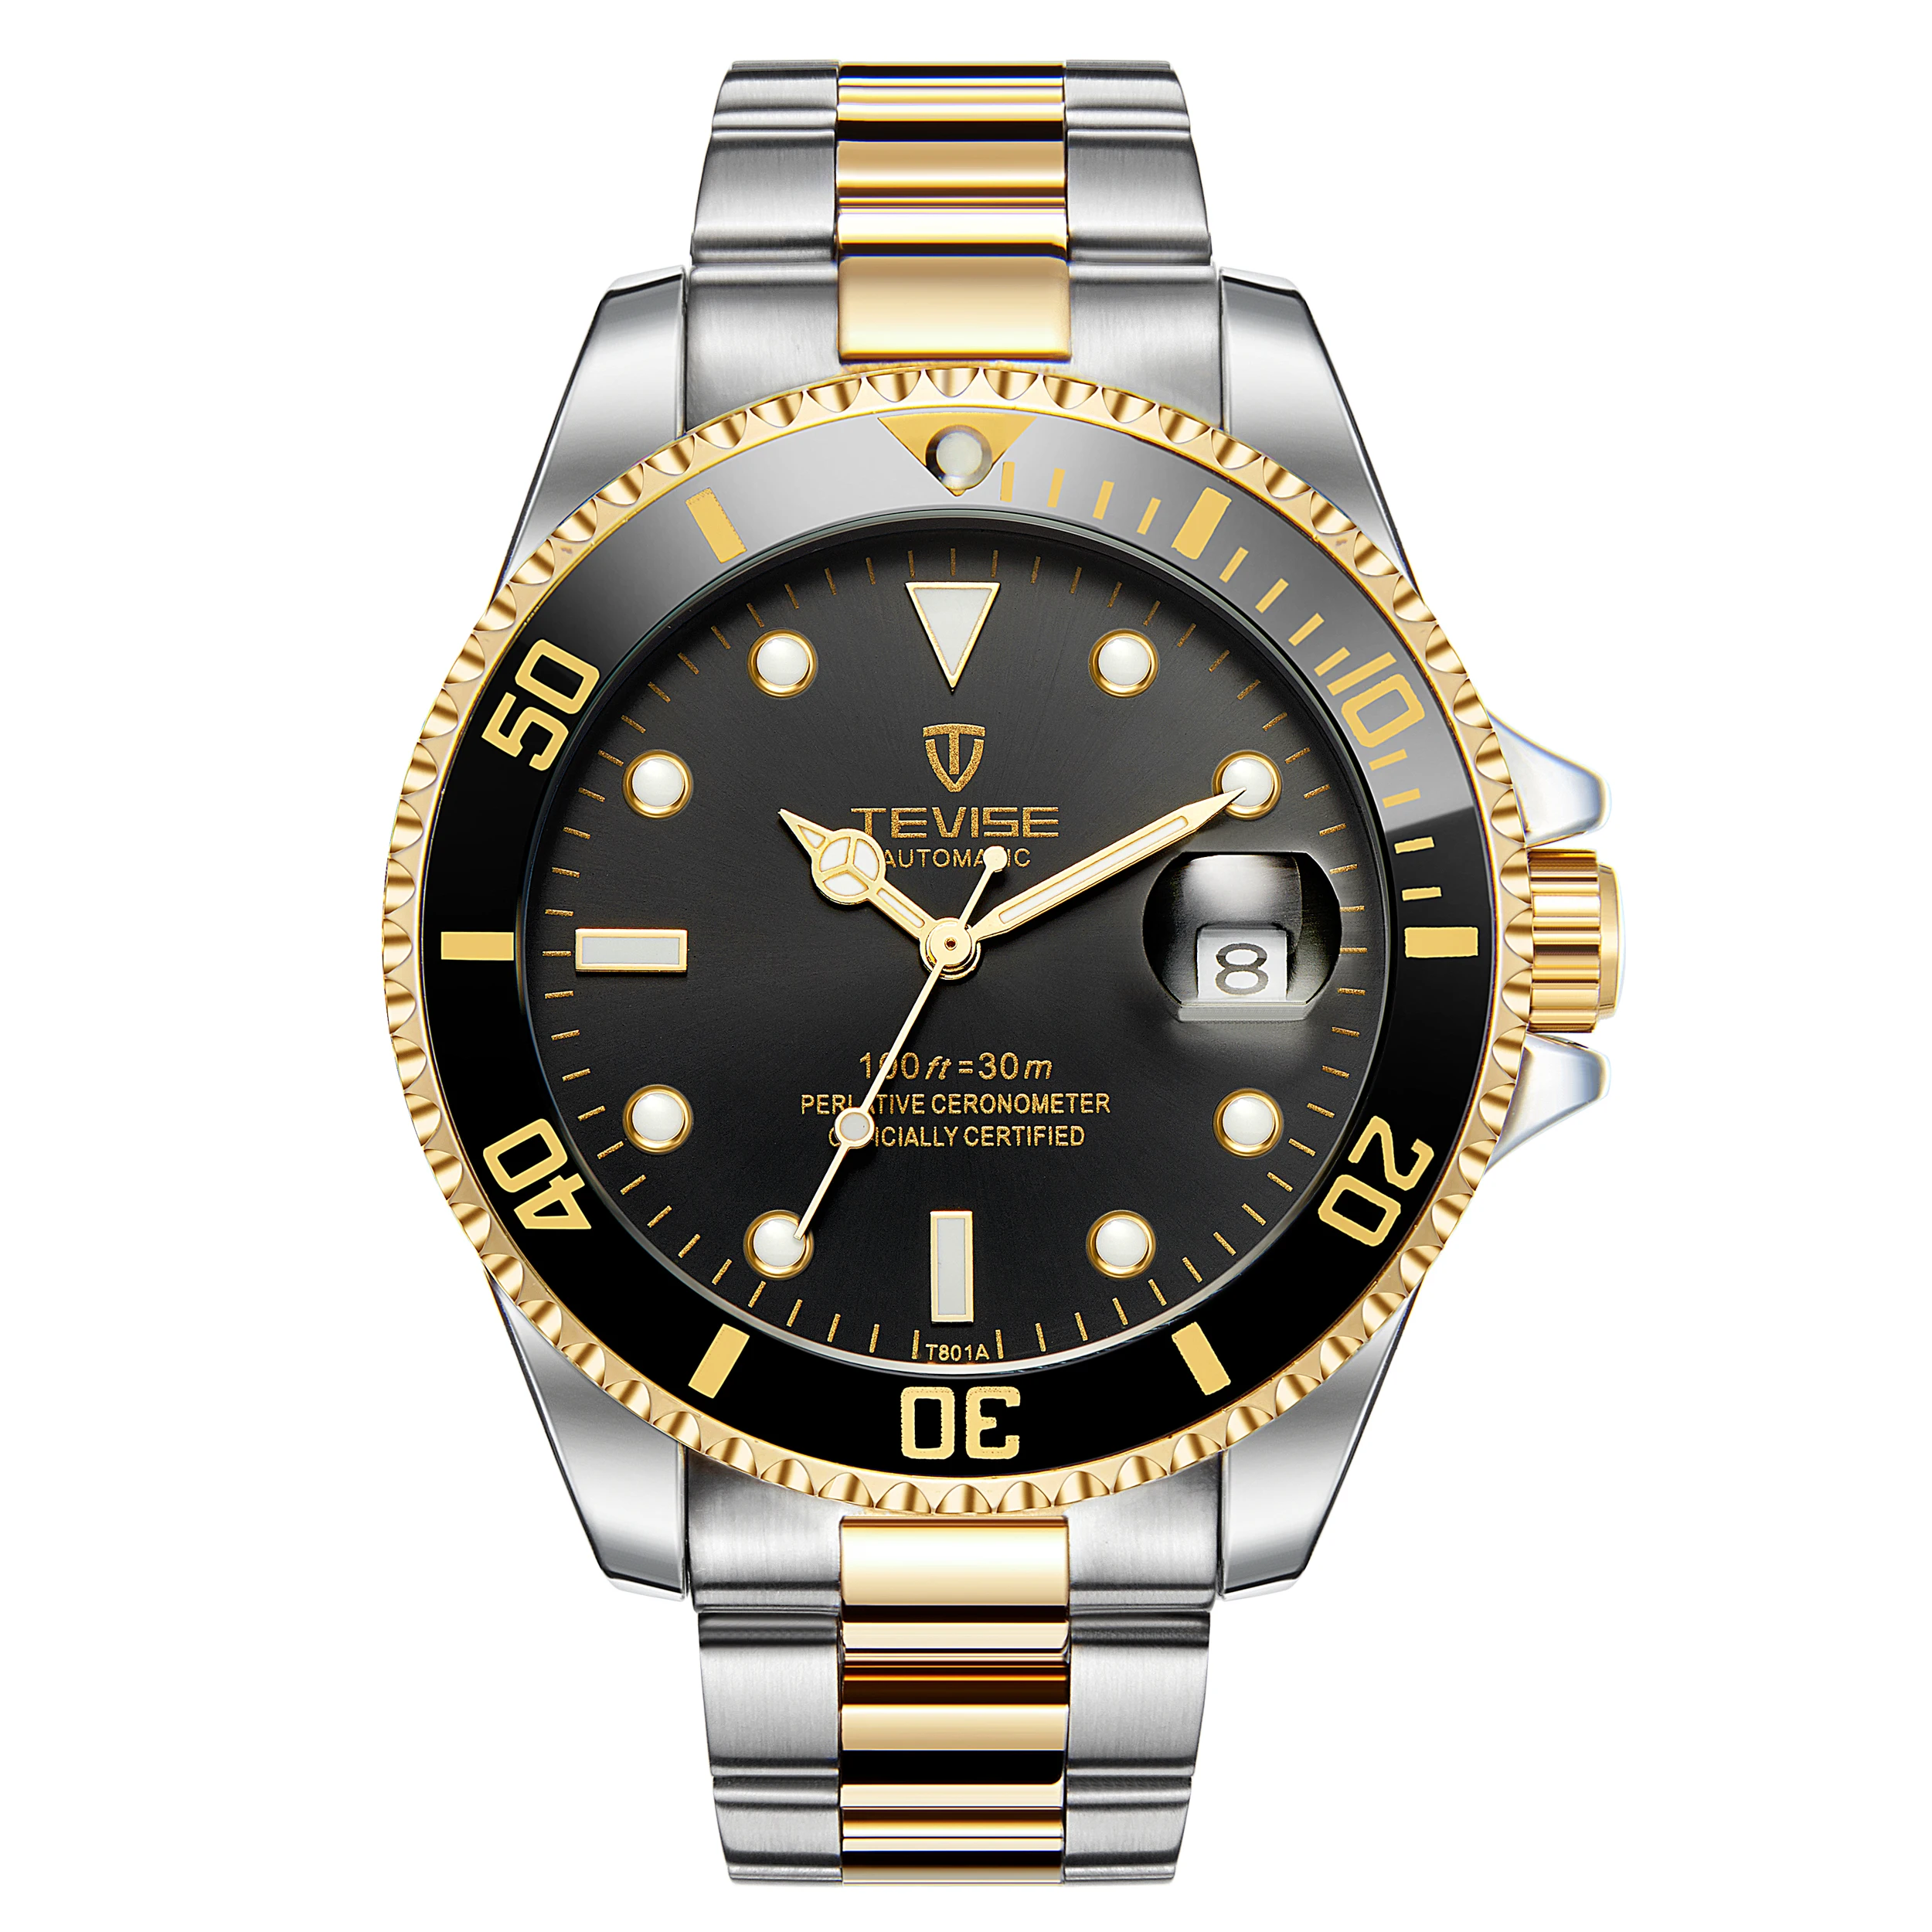 

Top Luxury Branded Affordable Men's Submarine Diver Style Watch Rollex Automatic Datejust Watches, Colors